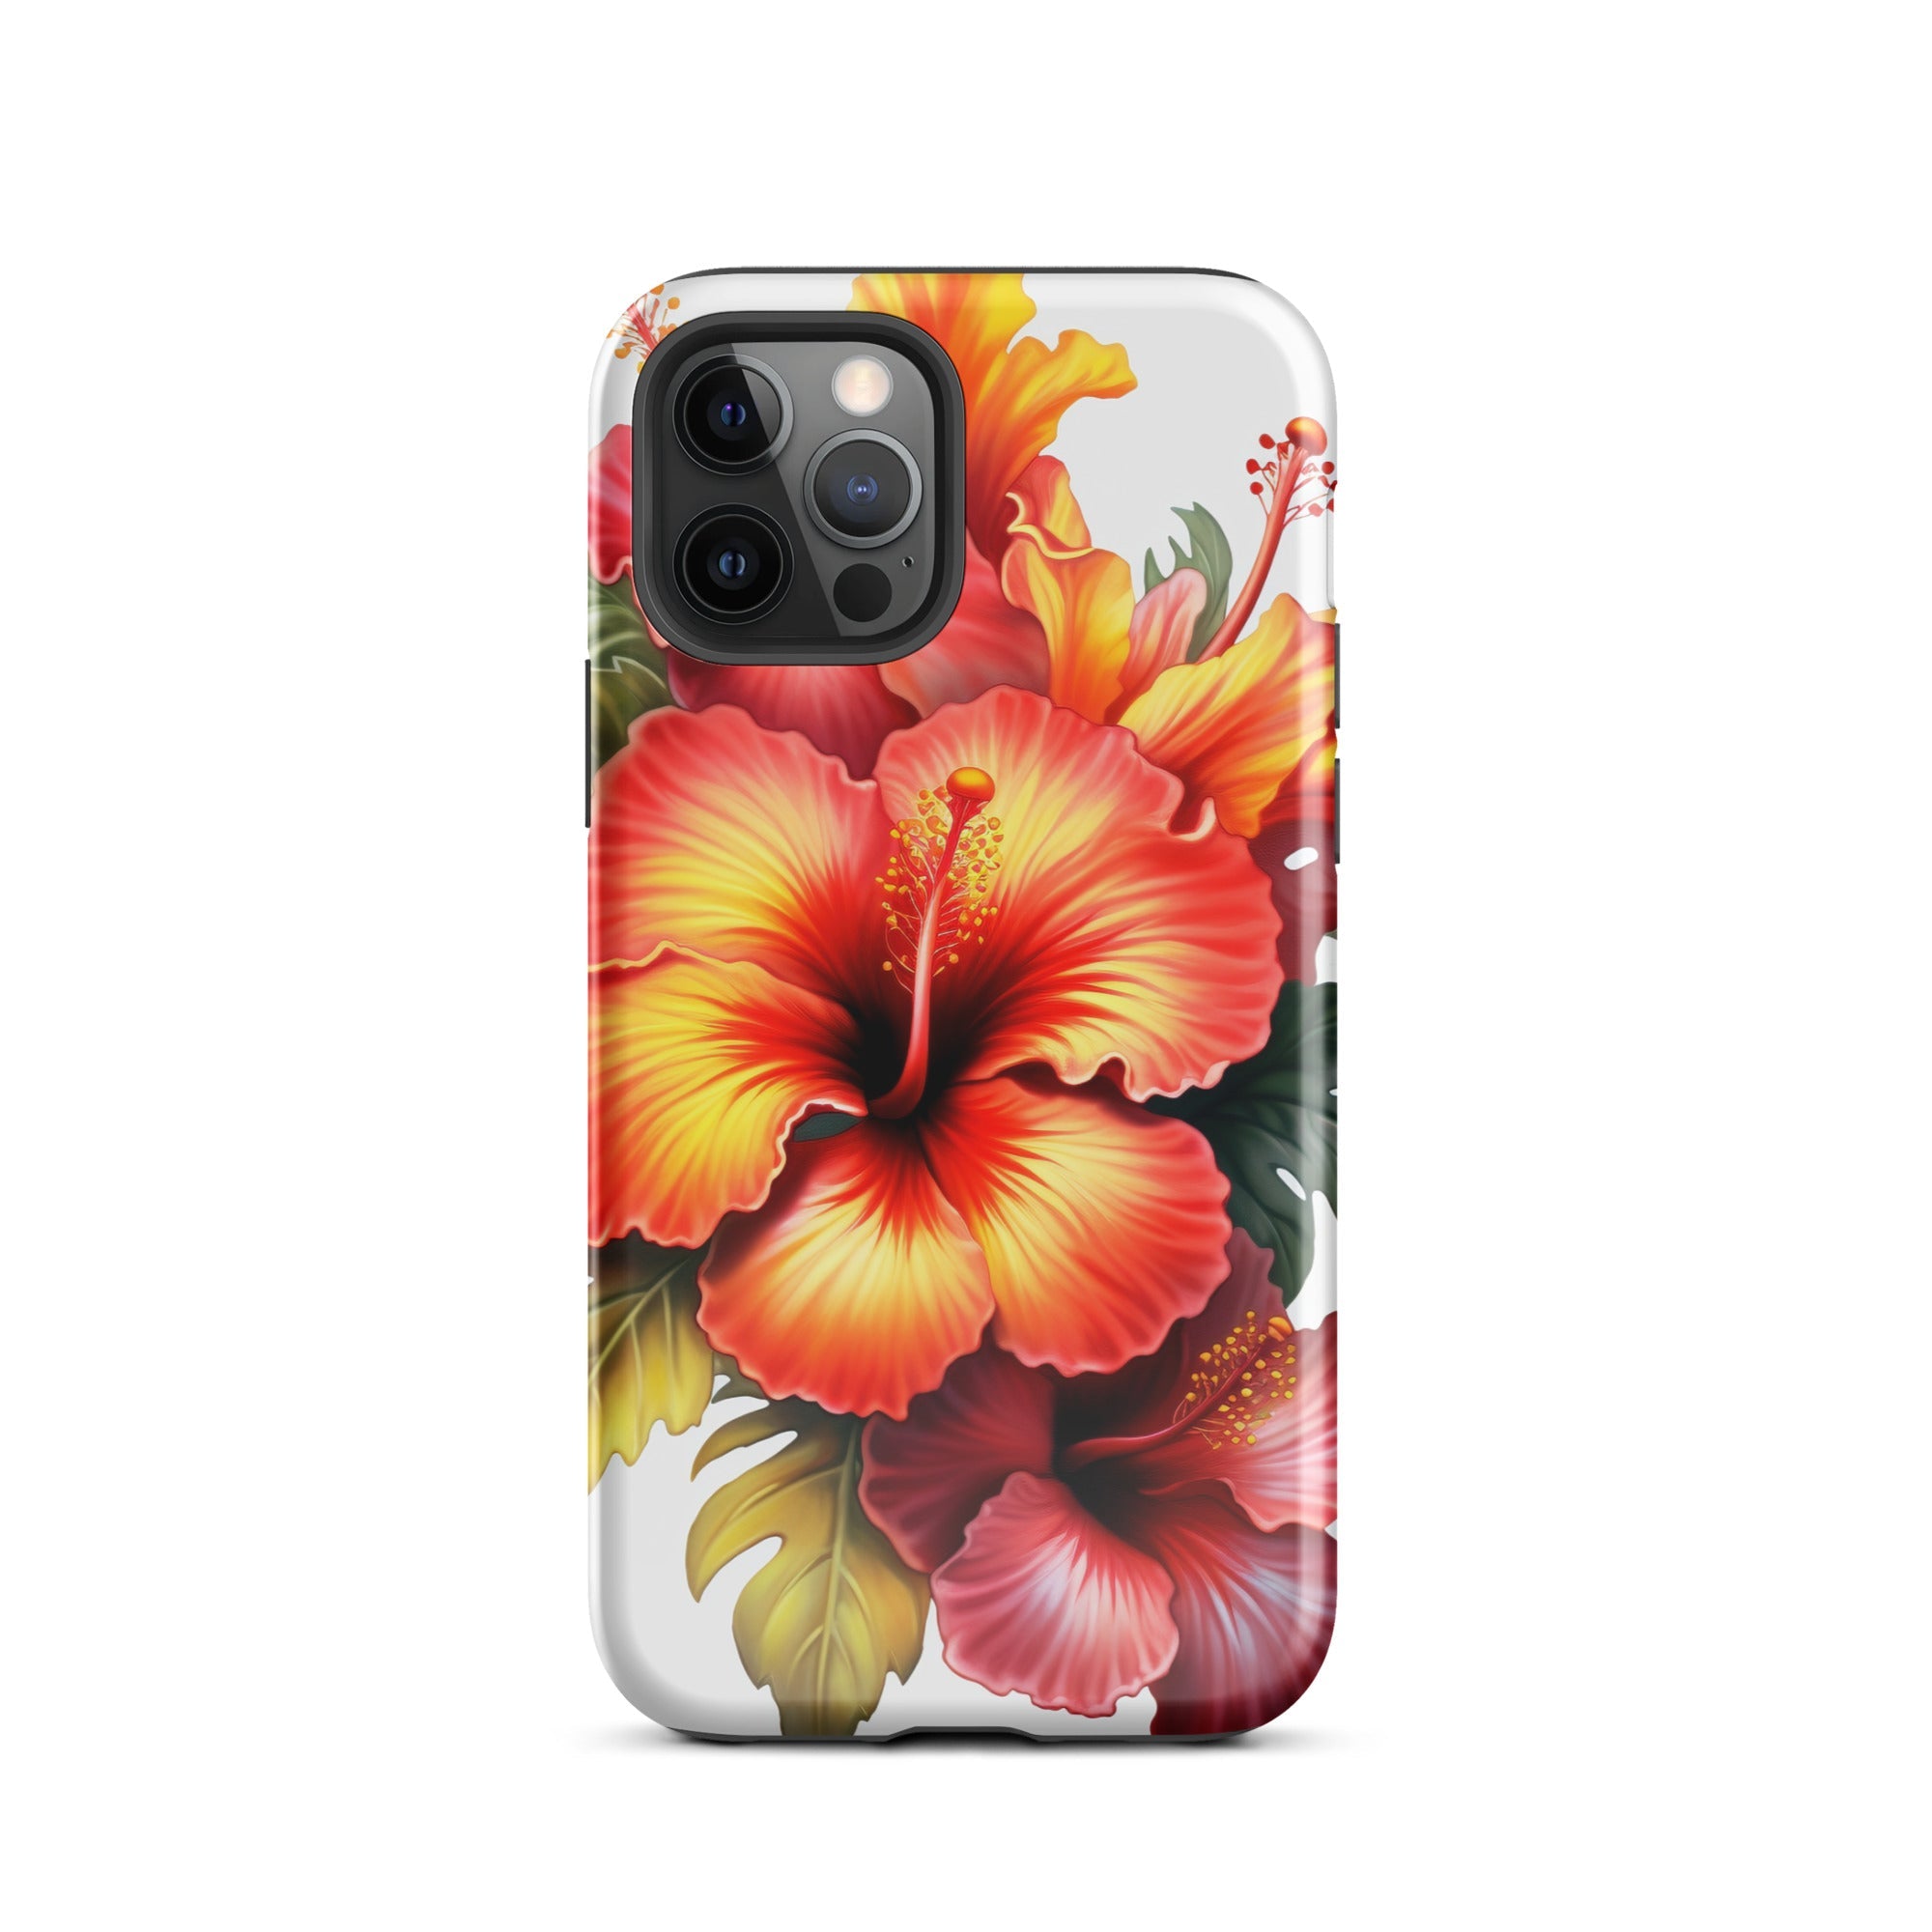 Hibiscus Flower iPhone Case by Visual Verse - Image 11